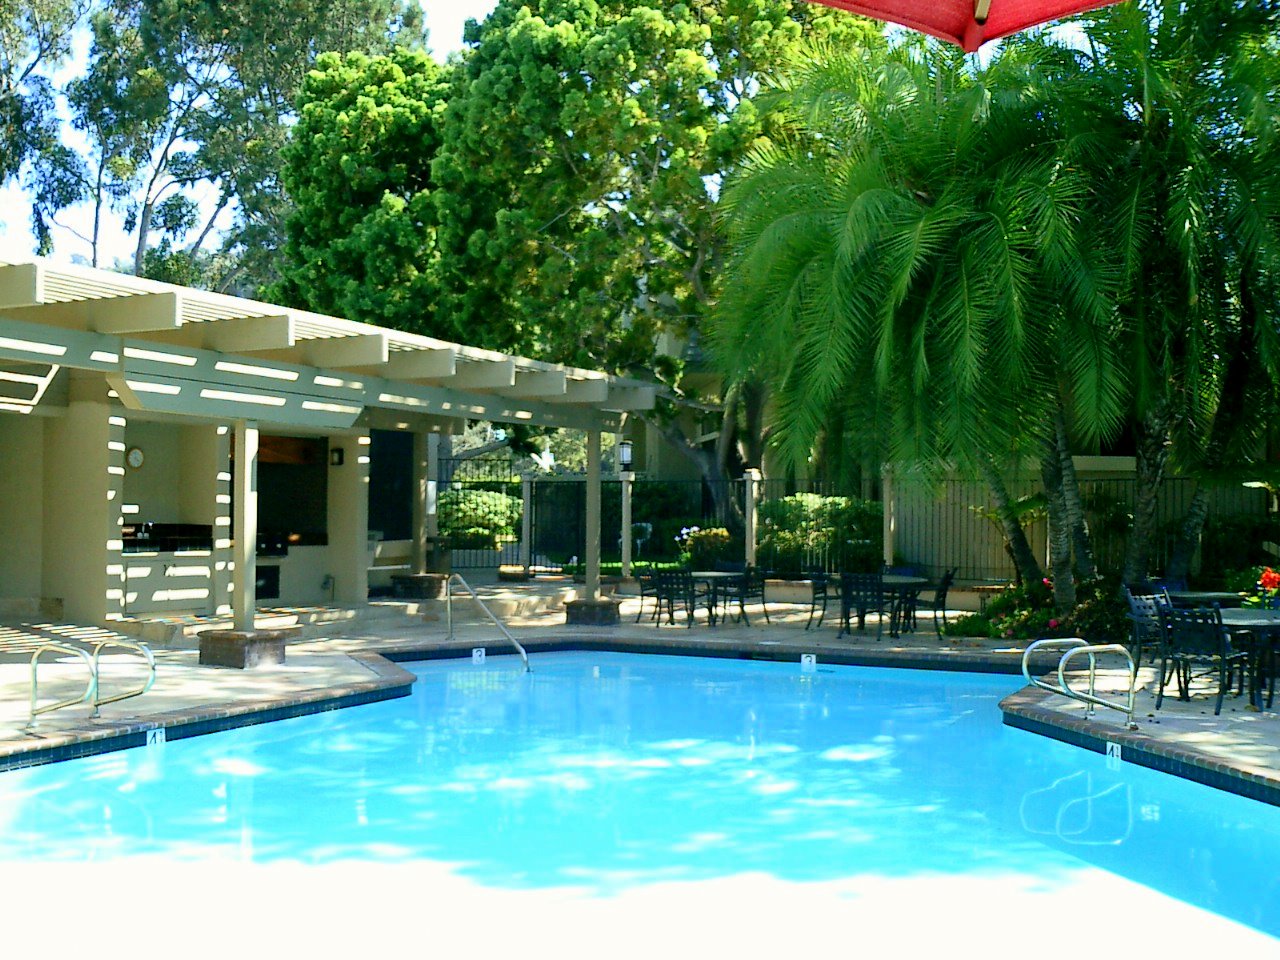 Our beautiful pool and spa